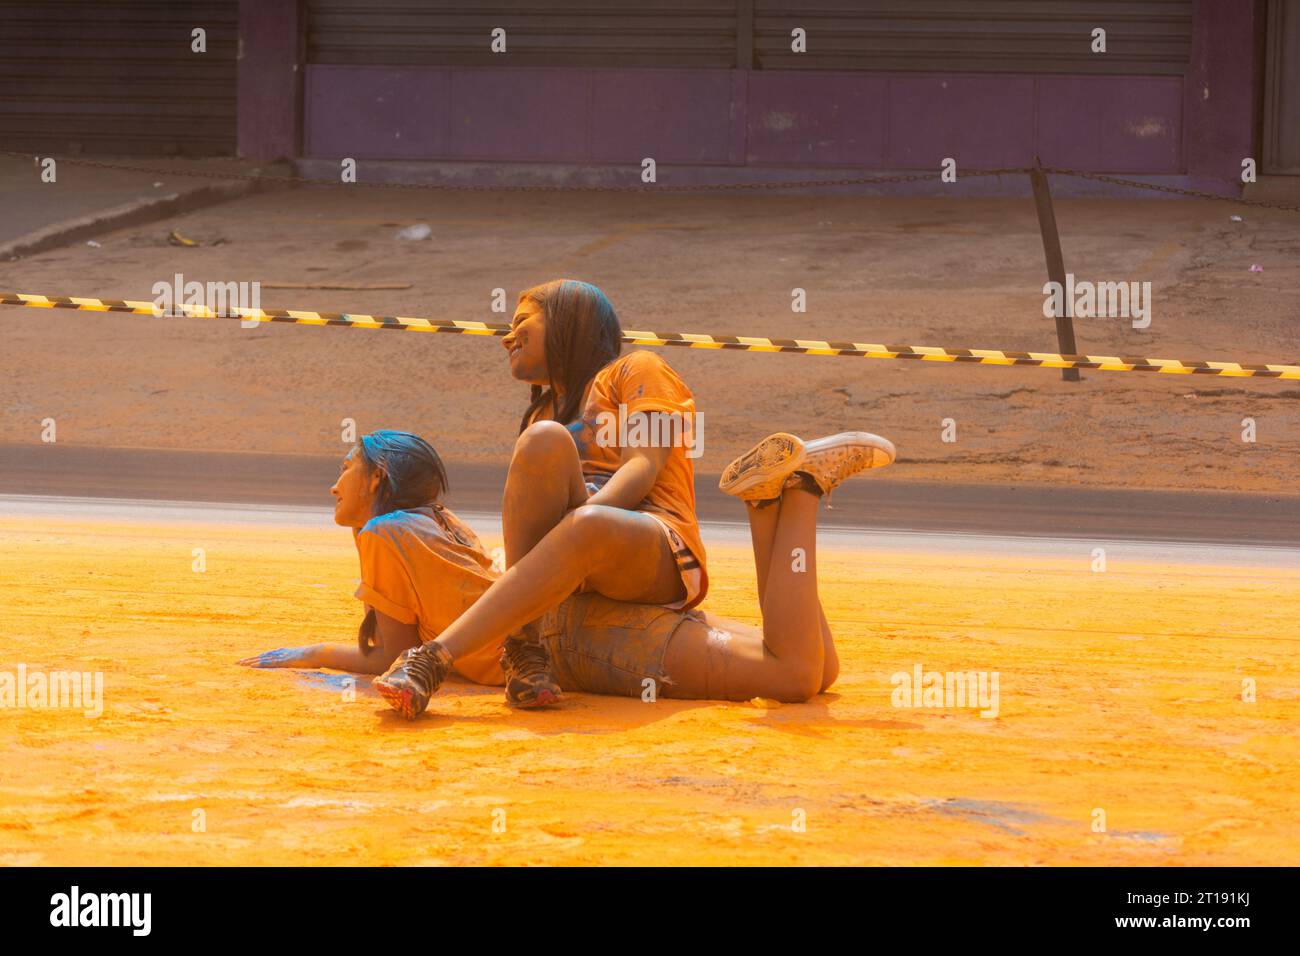 Salvador, Bahia, Brazil - March 22, 2015: People are seen playing during the colorful race at Dique do Tororo in the city of Salvador, Bahia. Stock Photo